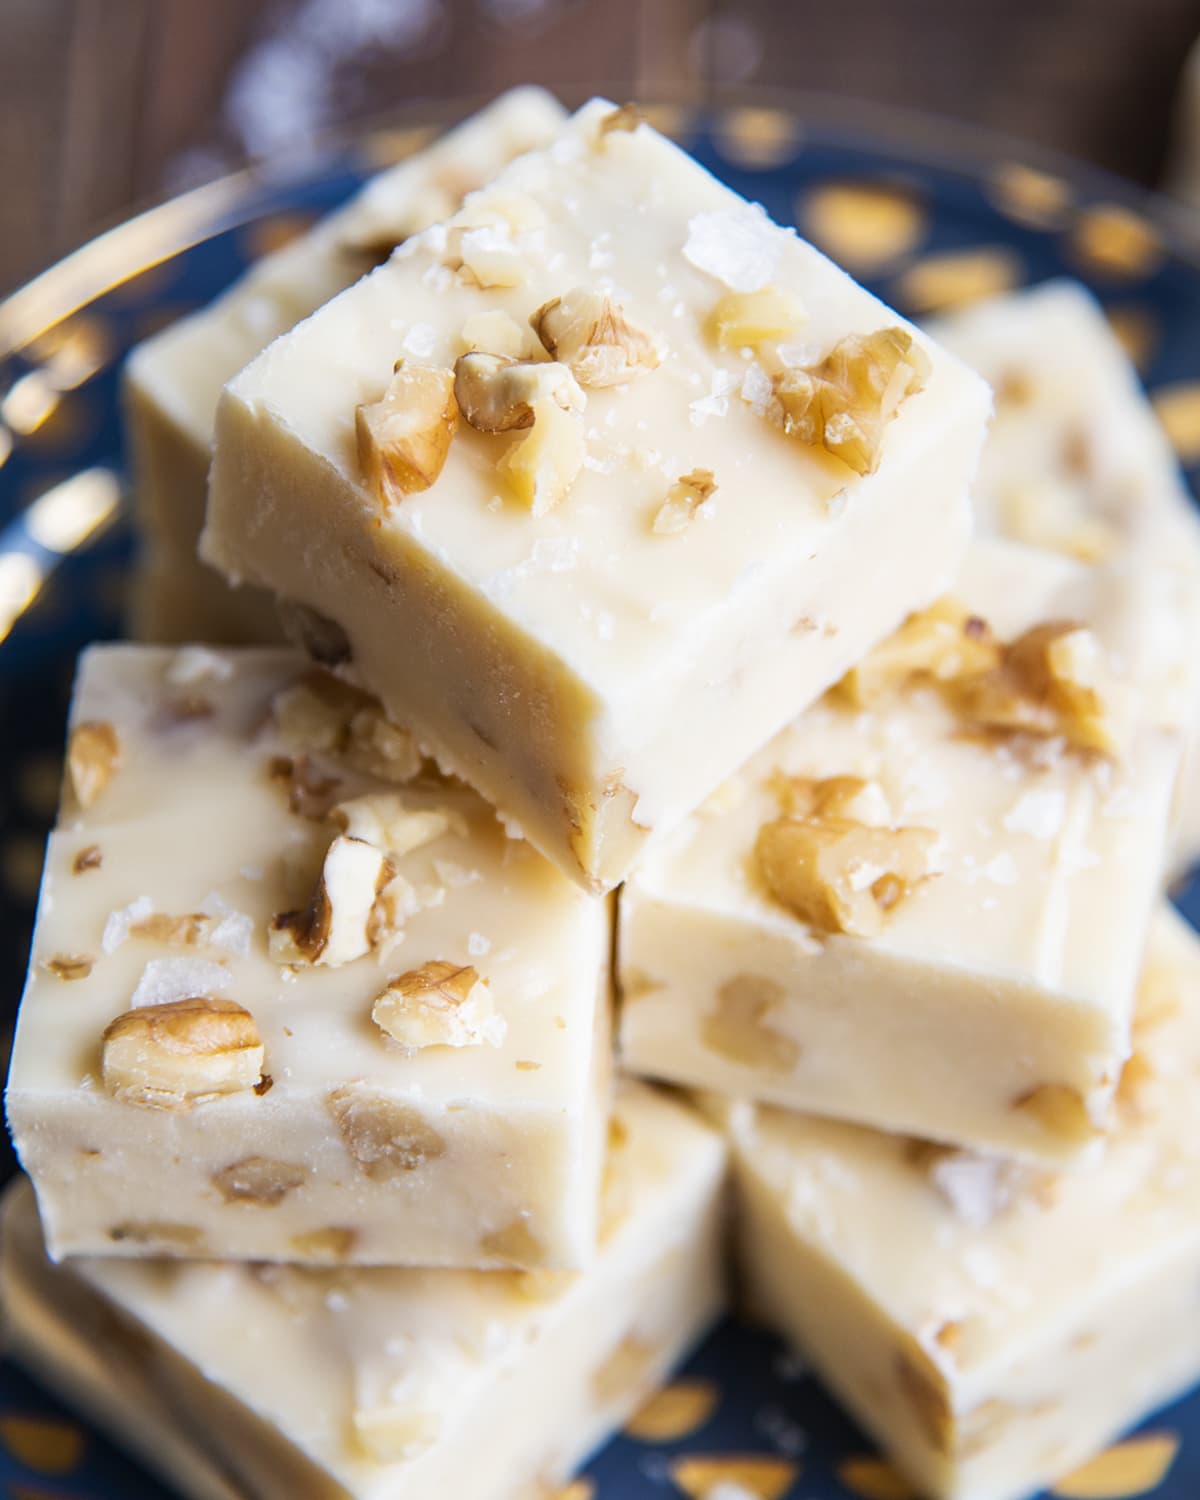 A close up of a pile of maple fudge pieces full of walnuts and topped with flaky sea salt.